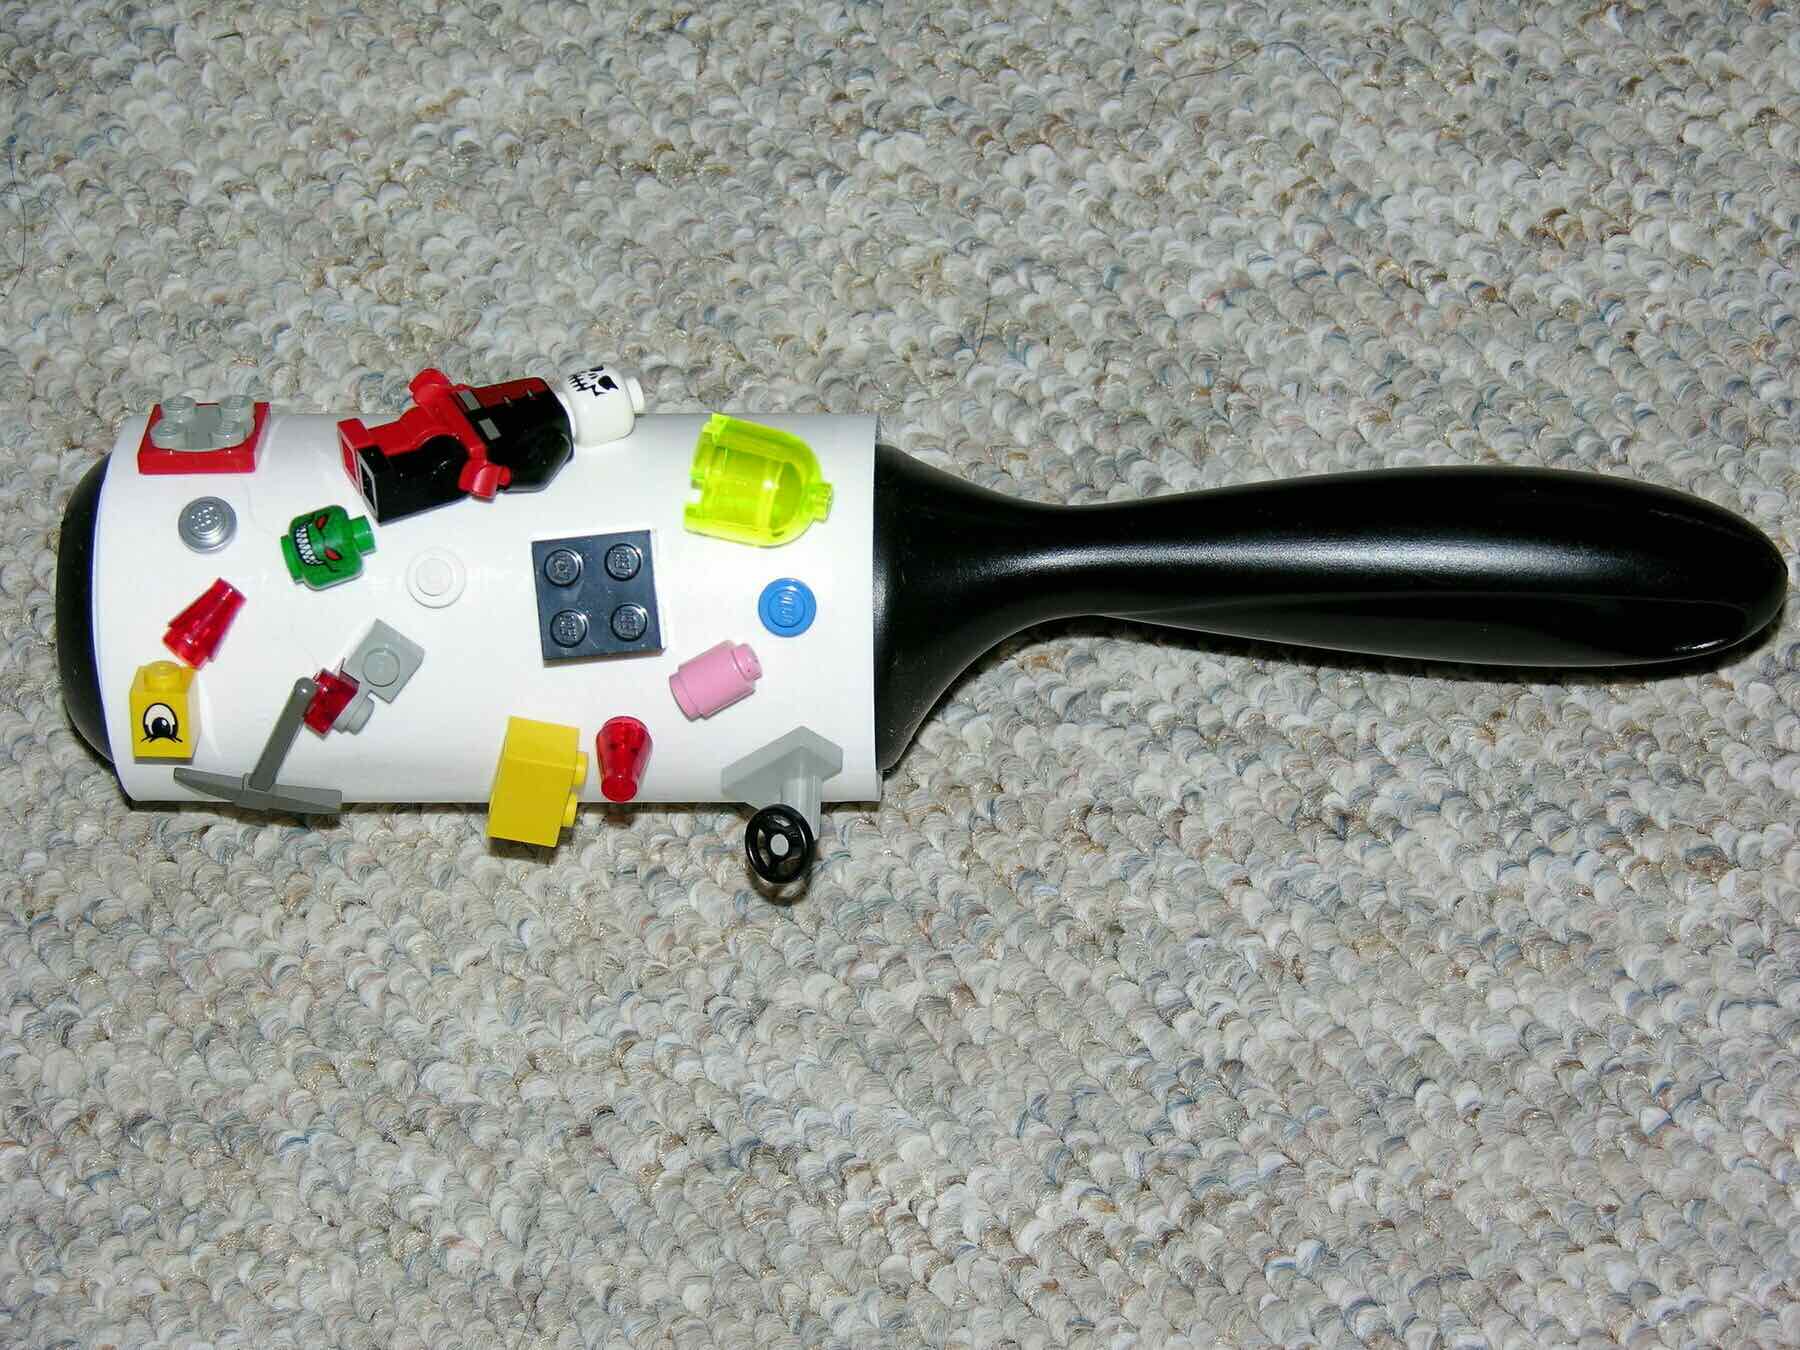 “Lint Roller with Lego on it - CCA https://www.flickr.com/photos/8331761@N07/2502131903 musicmoon@rogers.com DSCN0627”